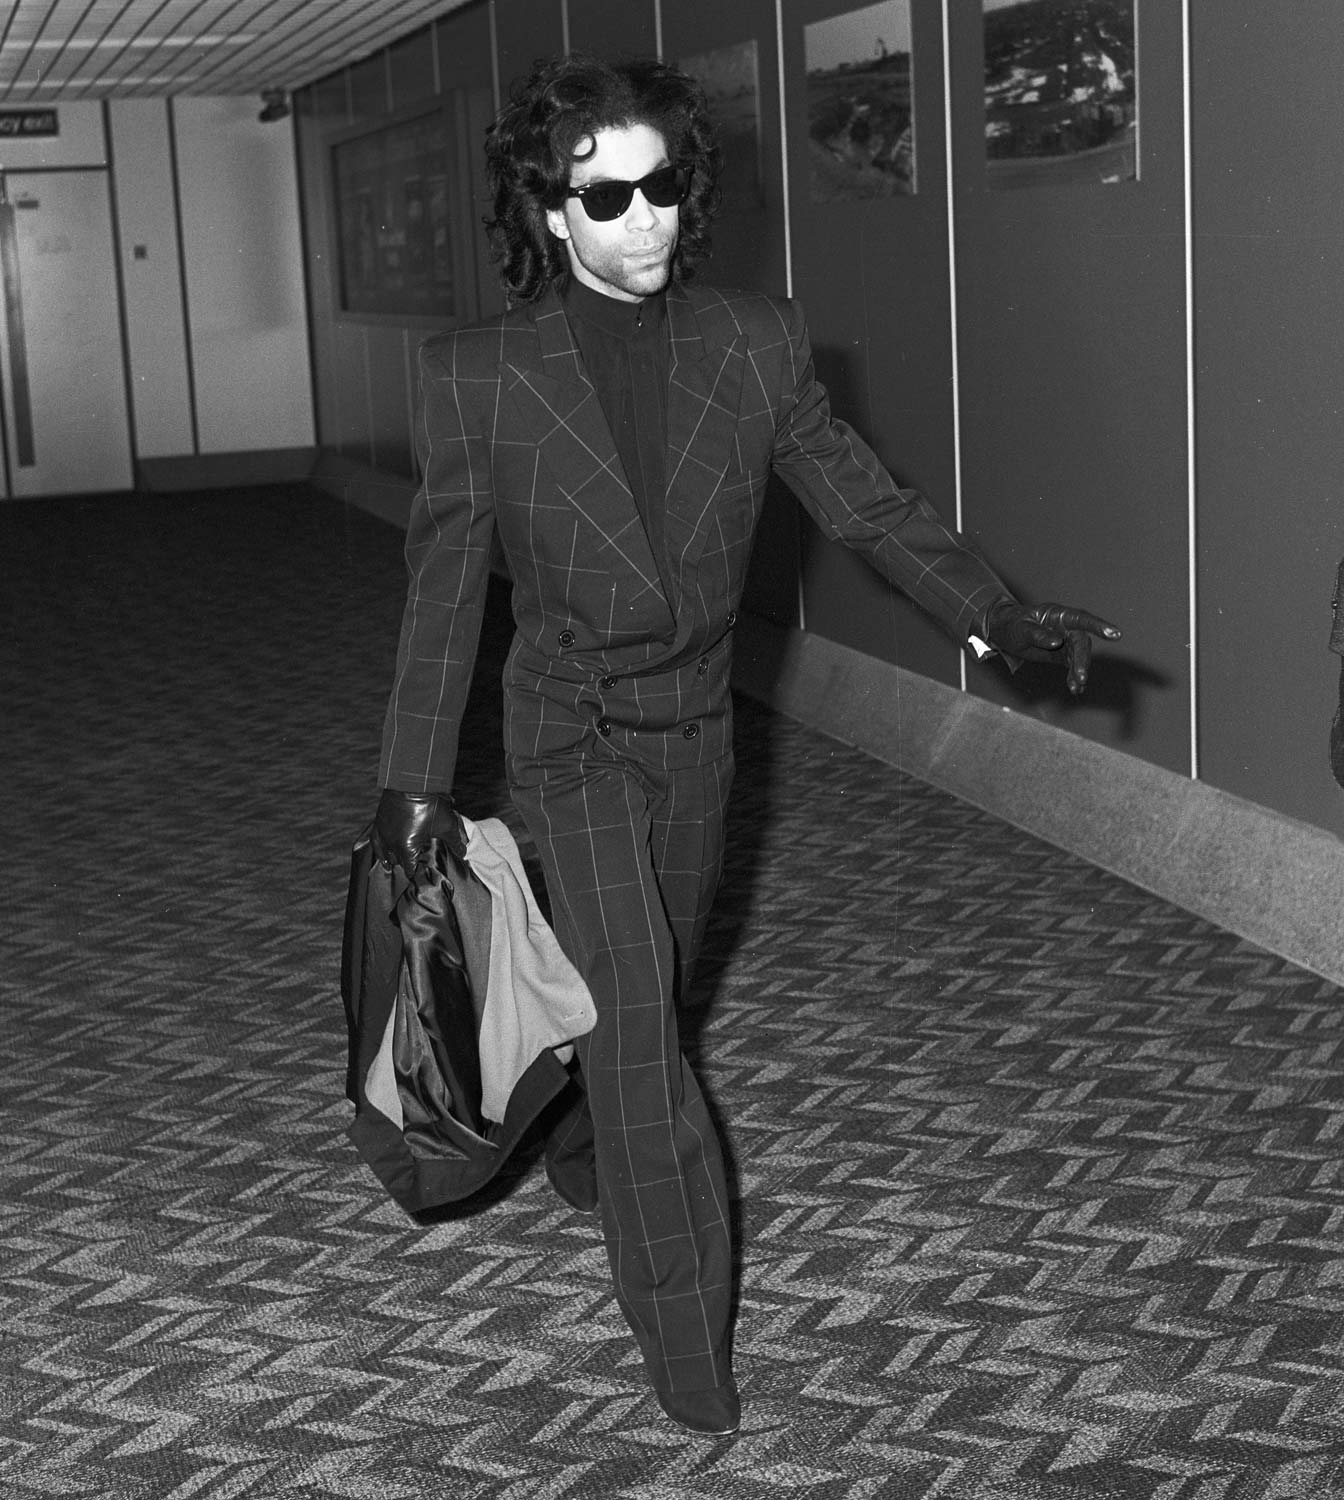 Prince arriving at Heathrow airport in London, 1989